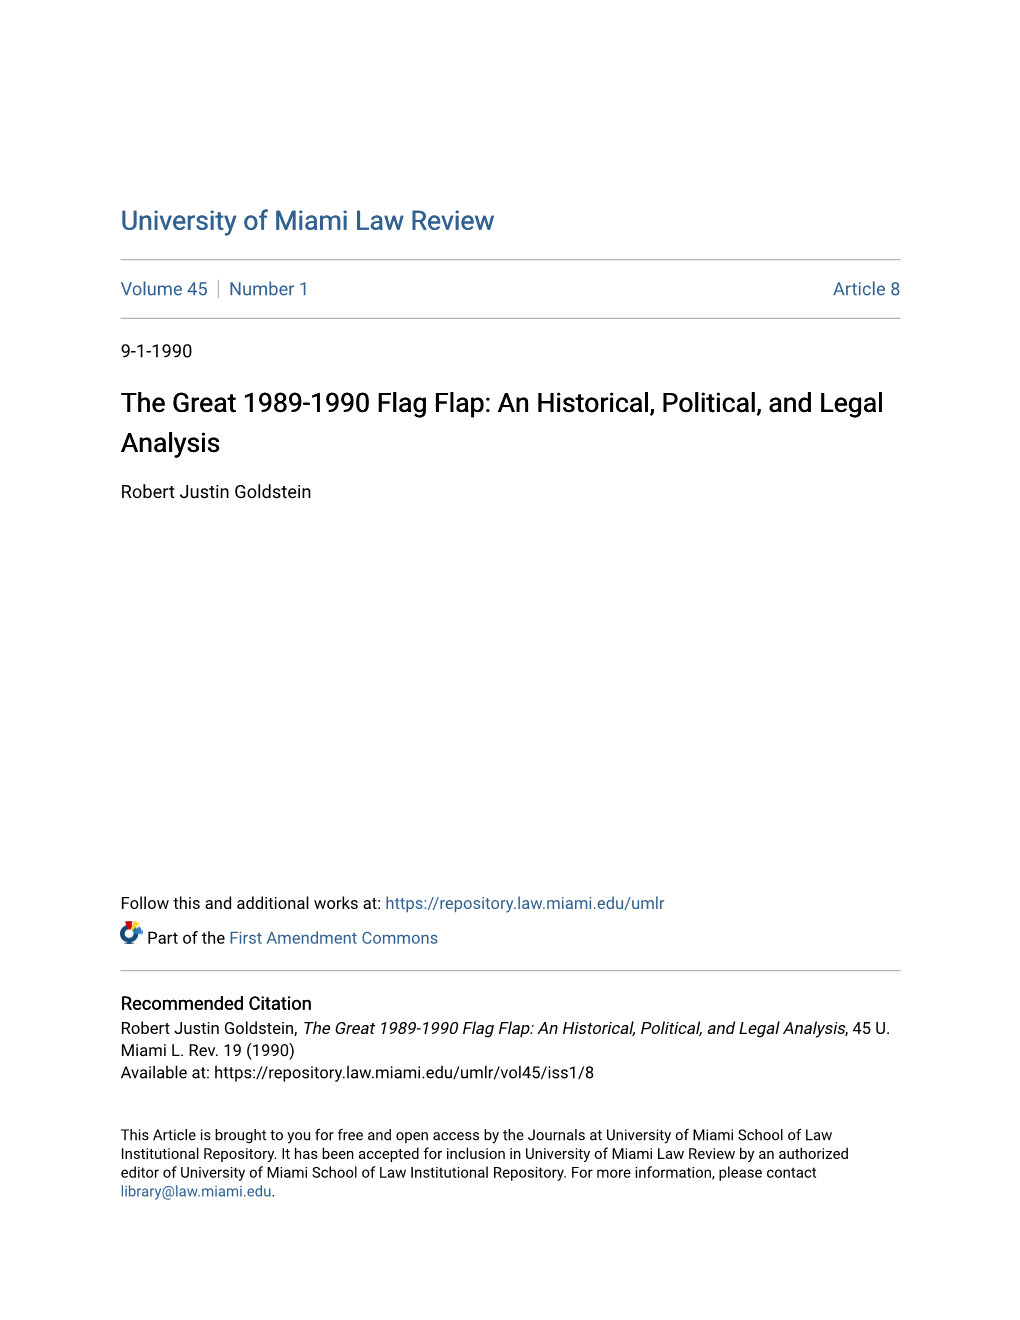 The Great 1989-1990 Flag Flap: an Historical, Political, and Legal Analysis